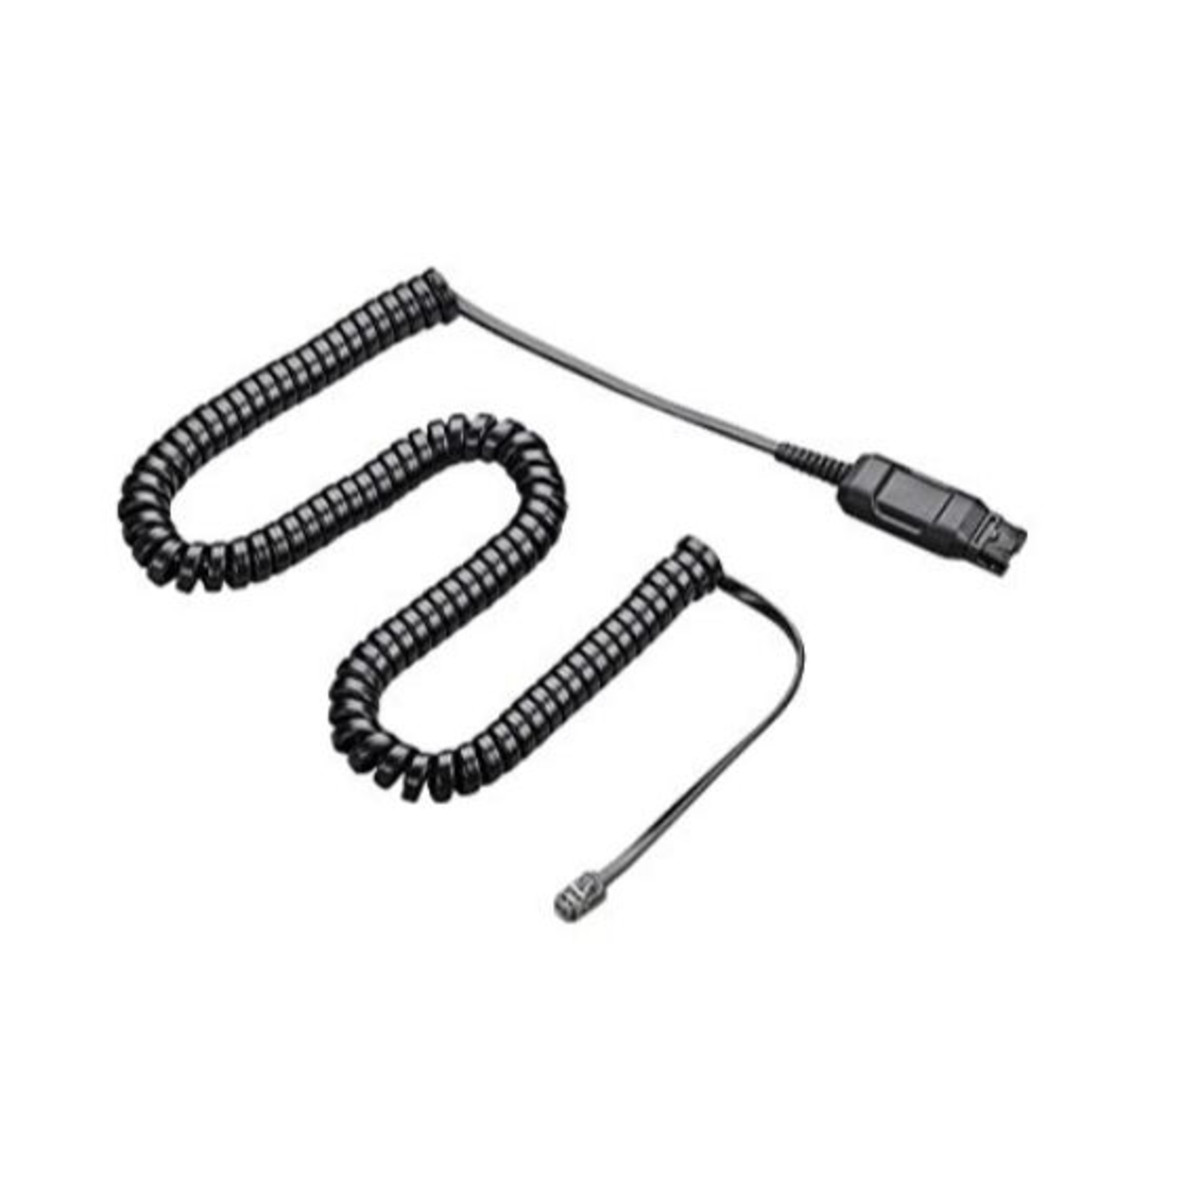 Plantronics HIC-10 Adapter Cable (p/n- 49323-46)